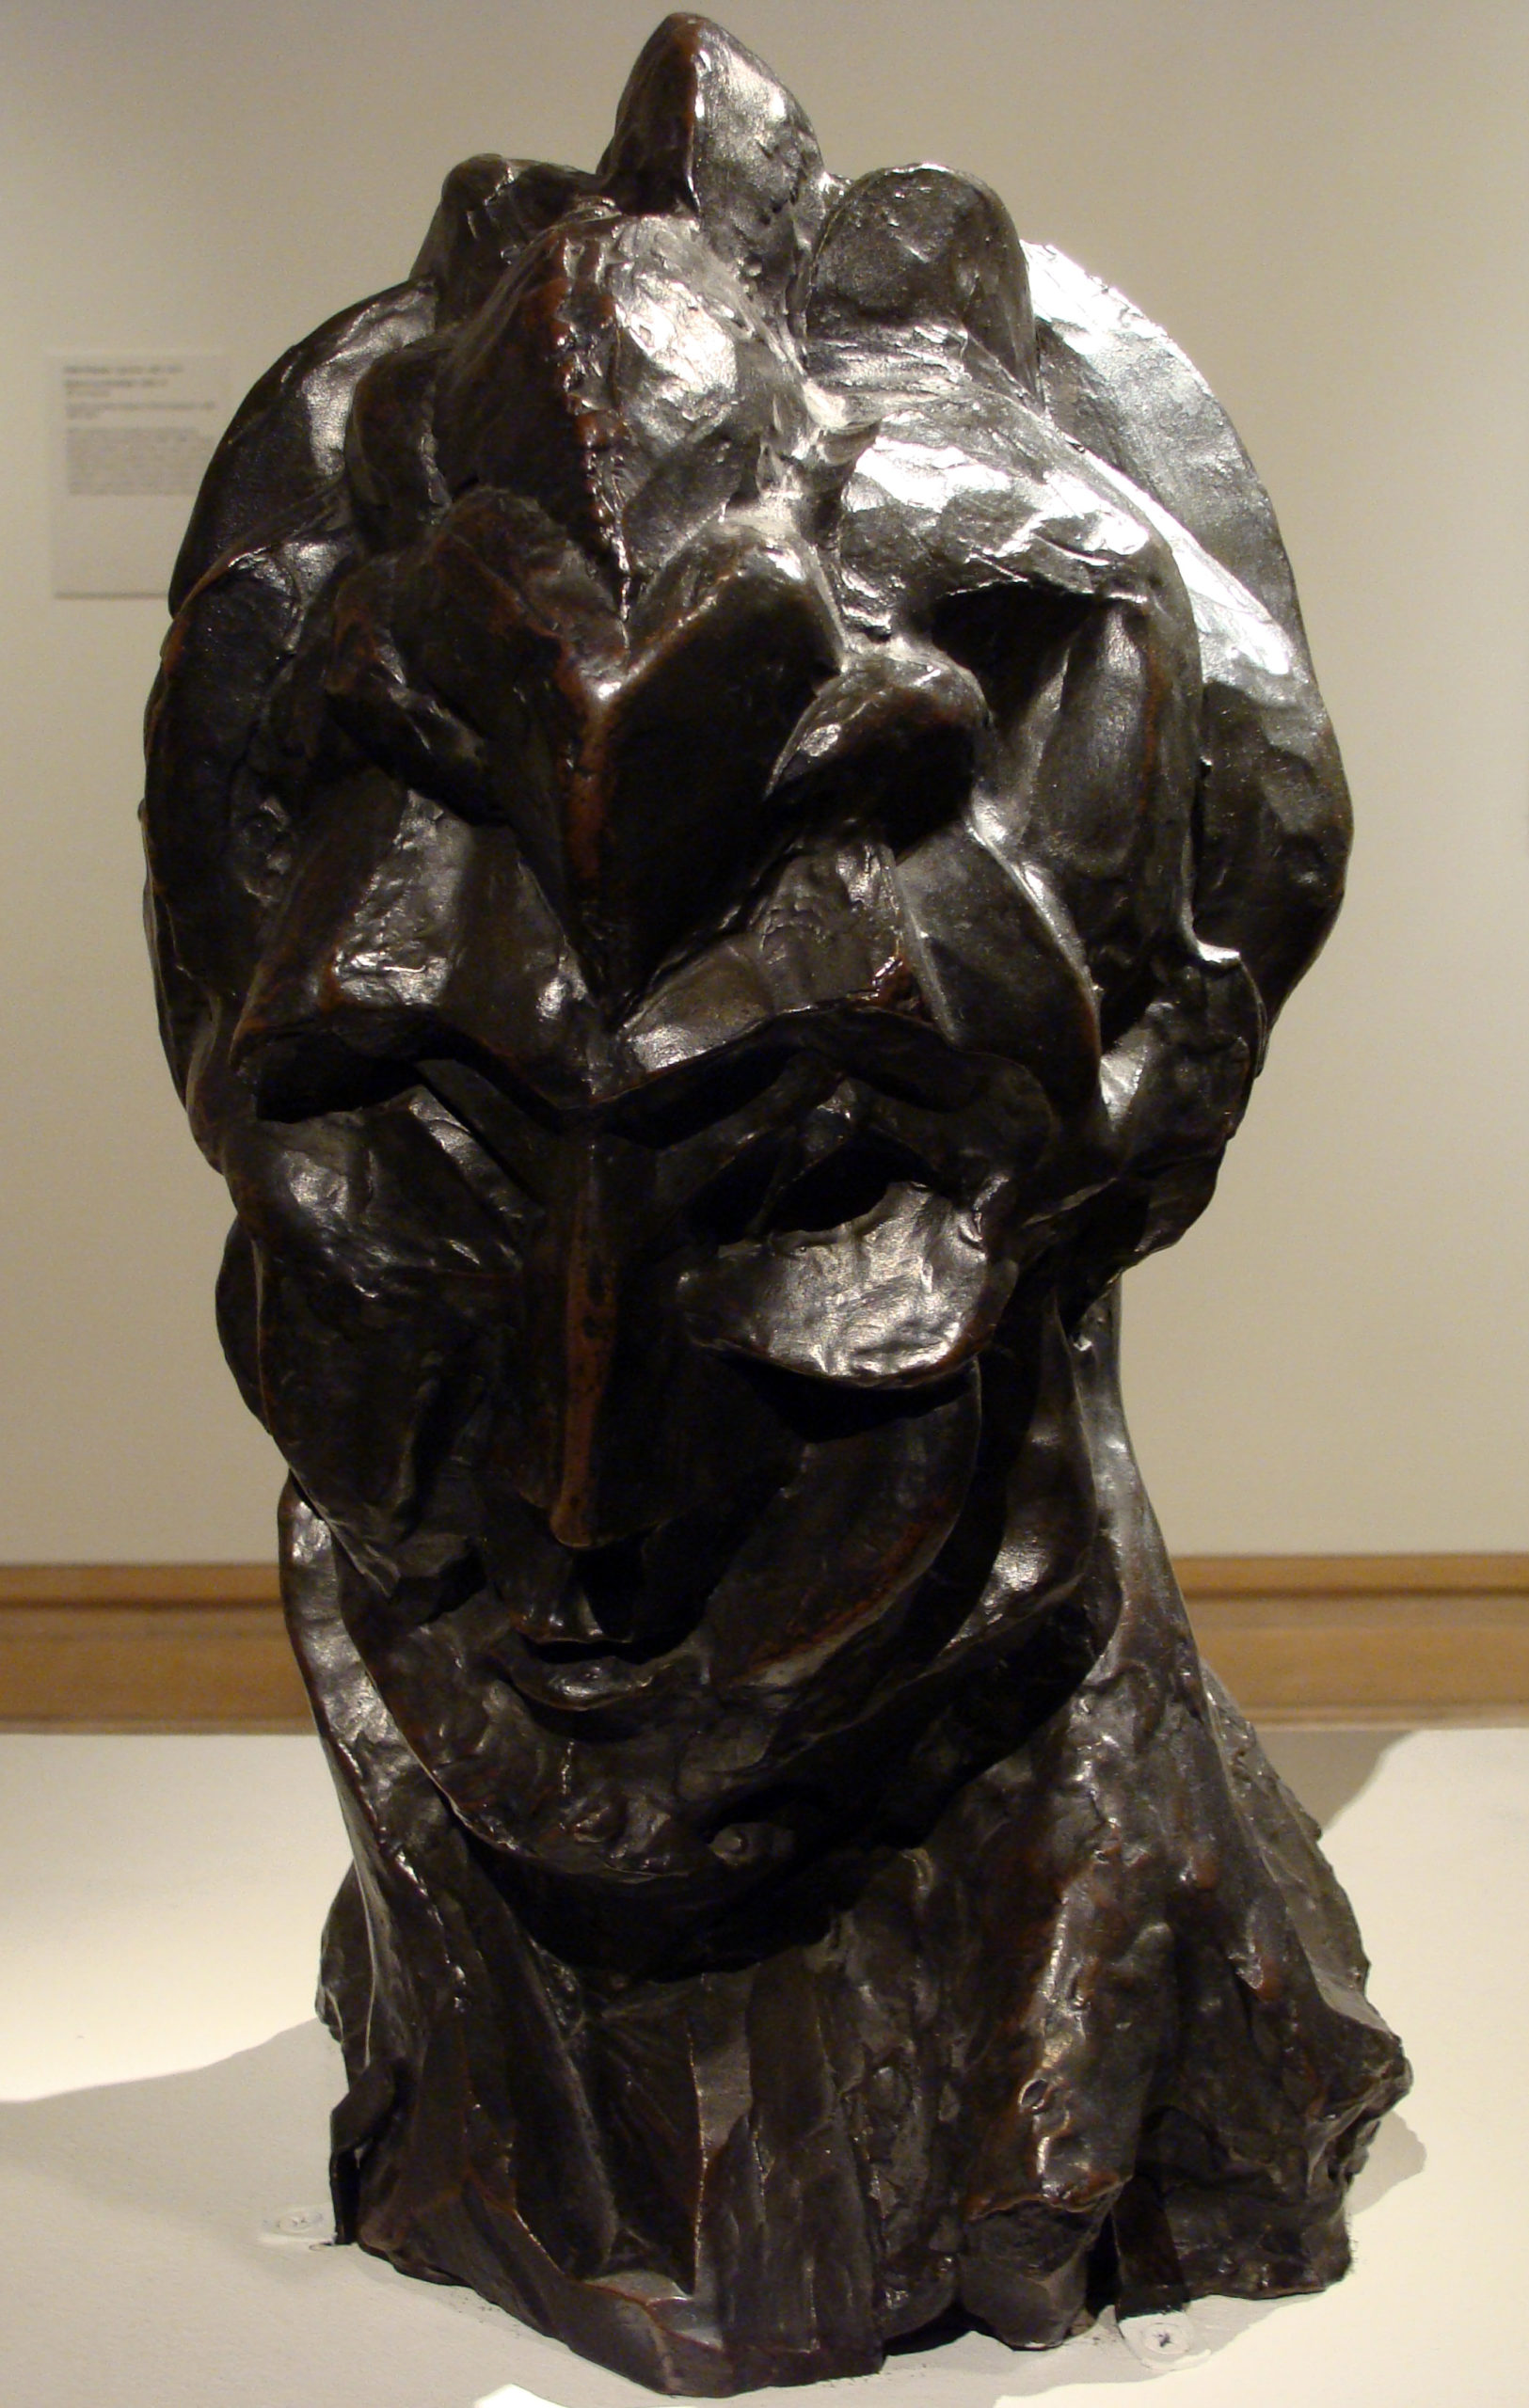 Pablo Picasso, Woman’s Head (Fernande), 1909, bronze, 16 ¼ x 9 ¾ x 10 ½ inches, The Metropolitan Museum of Art (photo: Ben Sutherland, CC BY 2.0)